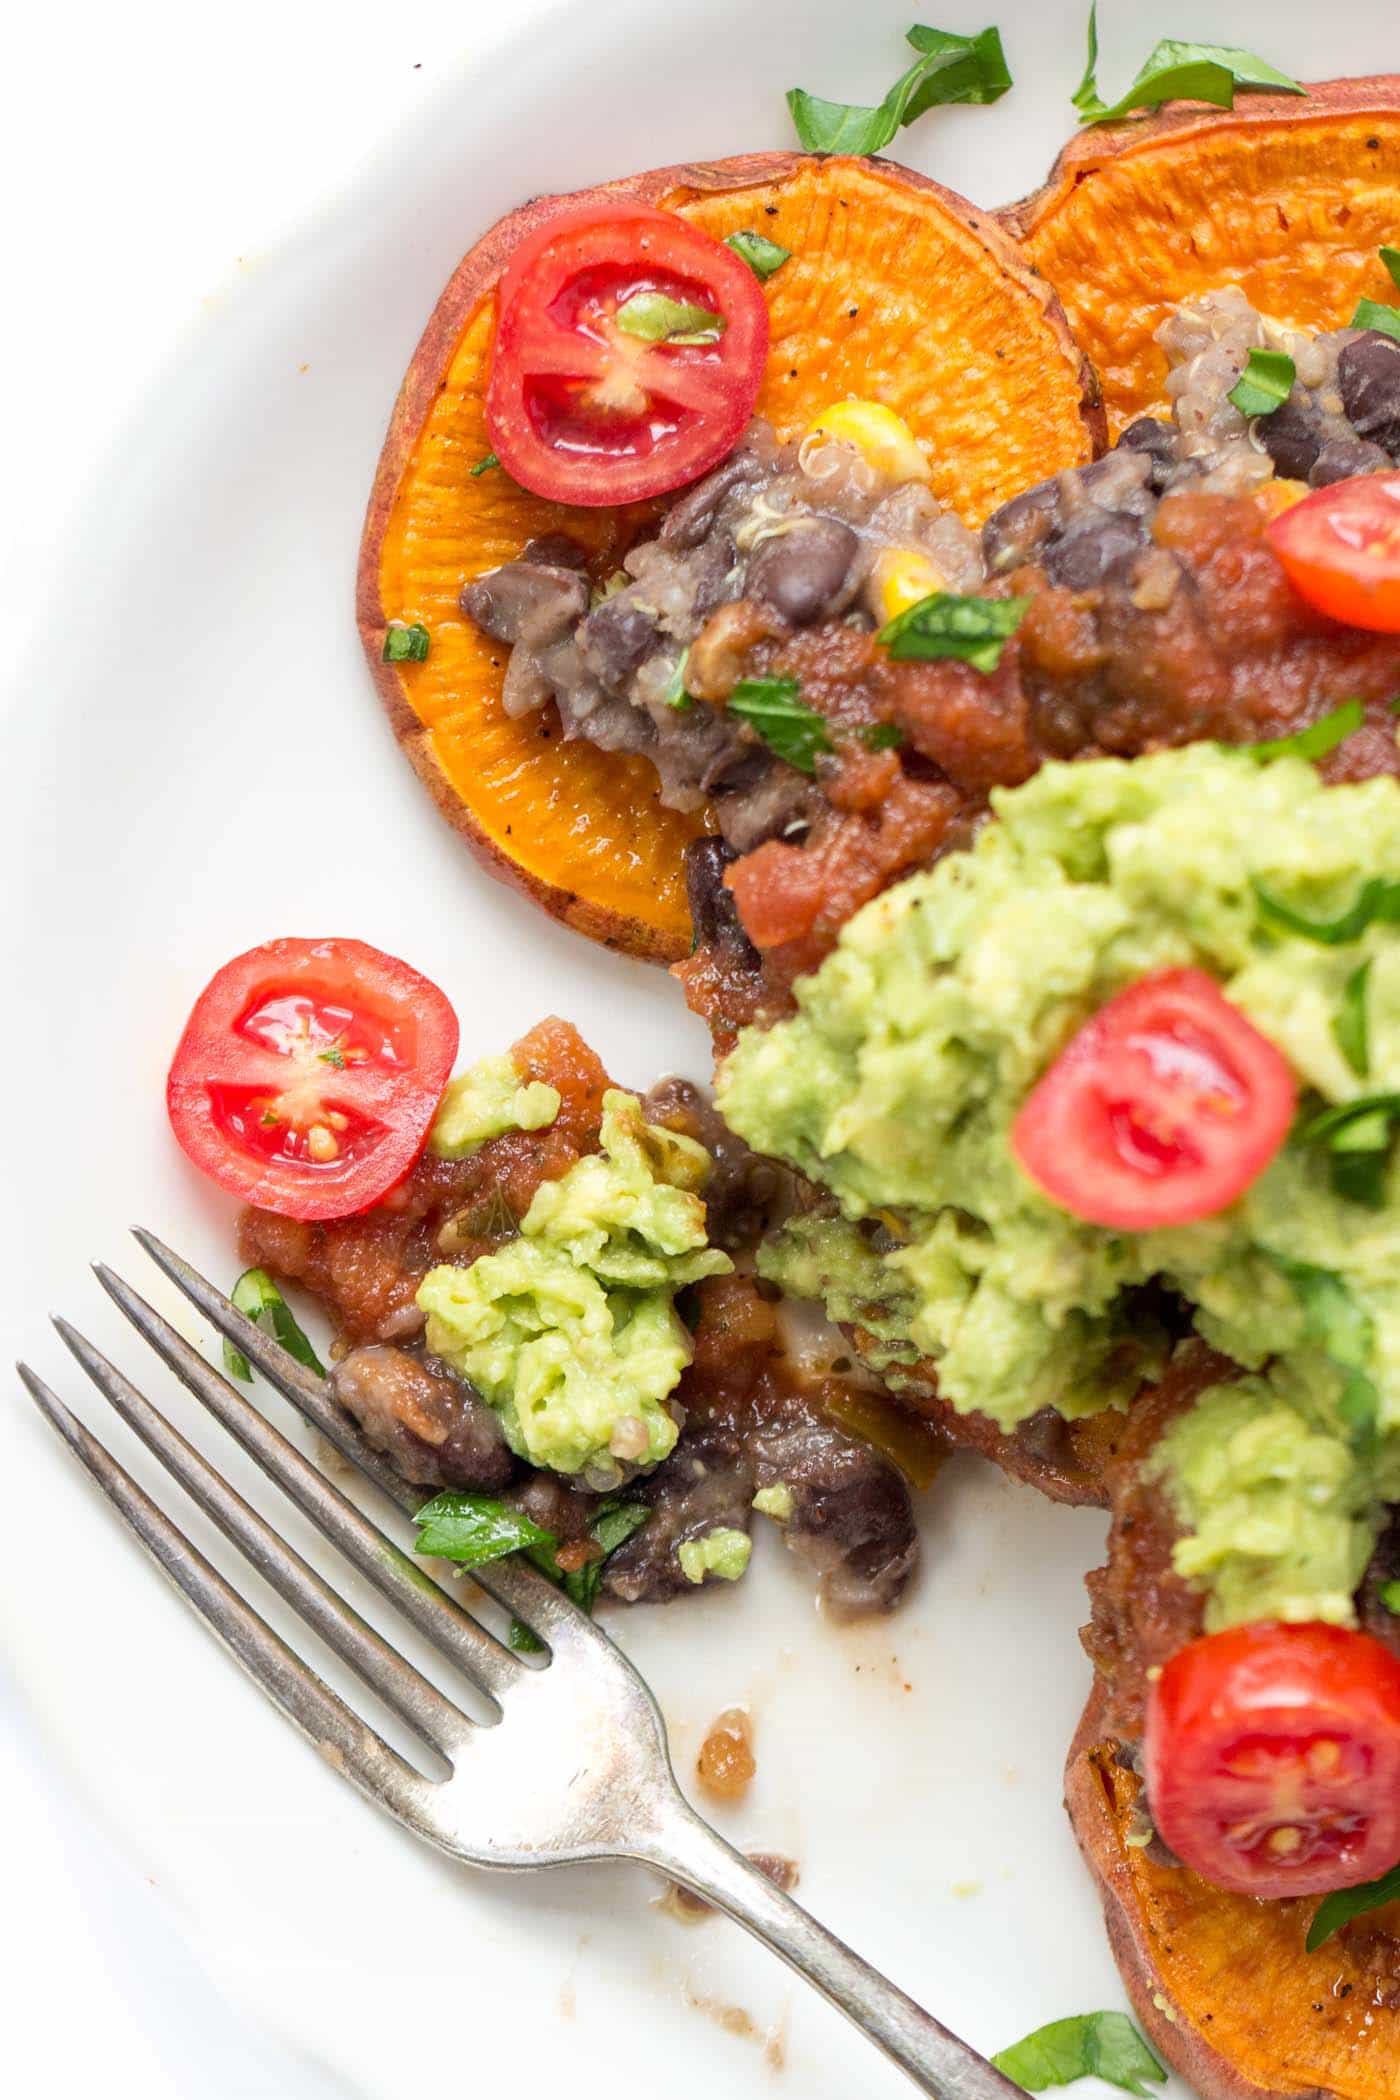 The BEST DAMN vegan nachos ever! Made with sweet potatoes, quinoa, black beans and topped with salsa + guac!